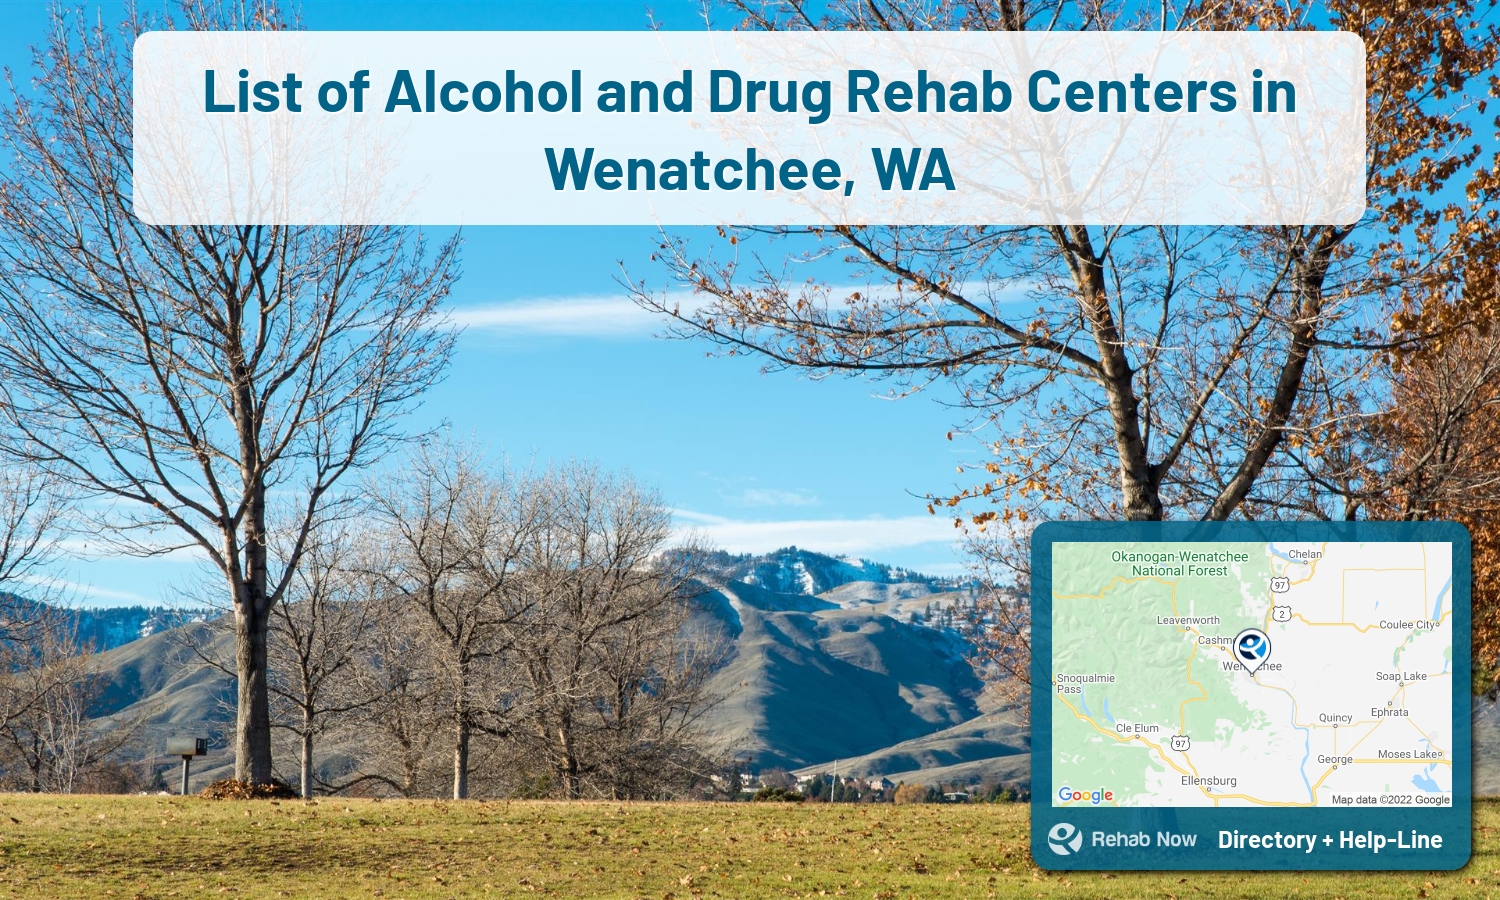 Wenatchee, WA Treatment Centers. Find drug rehab in Wenatchee, Washington, or detox and treatment programs. Get the right help now!